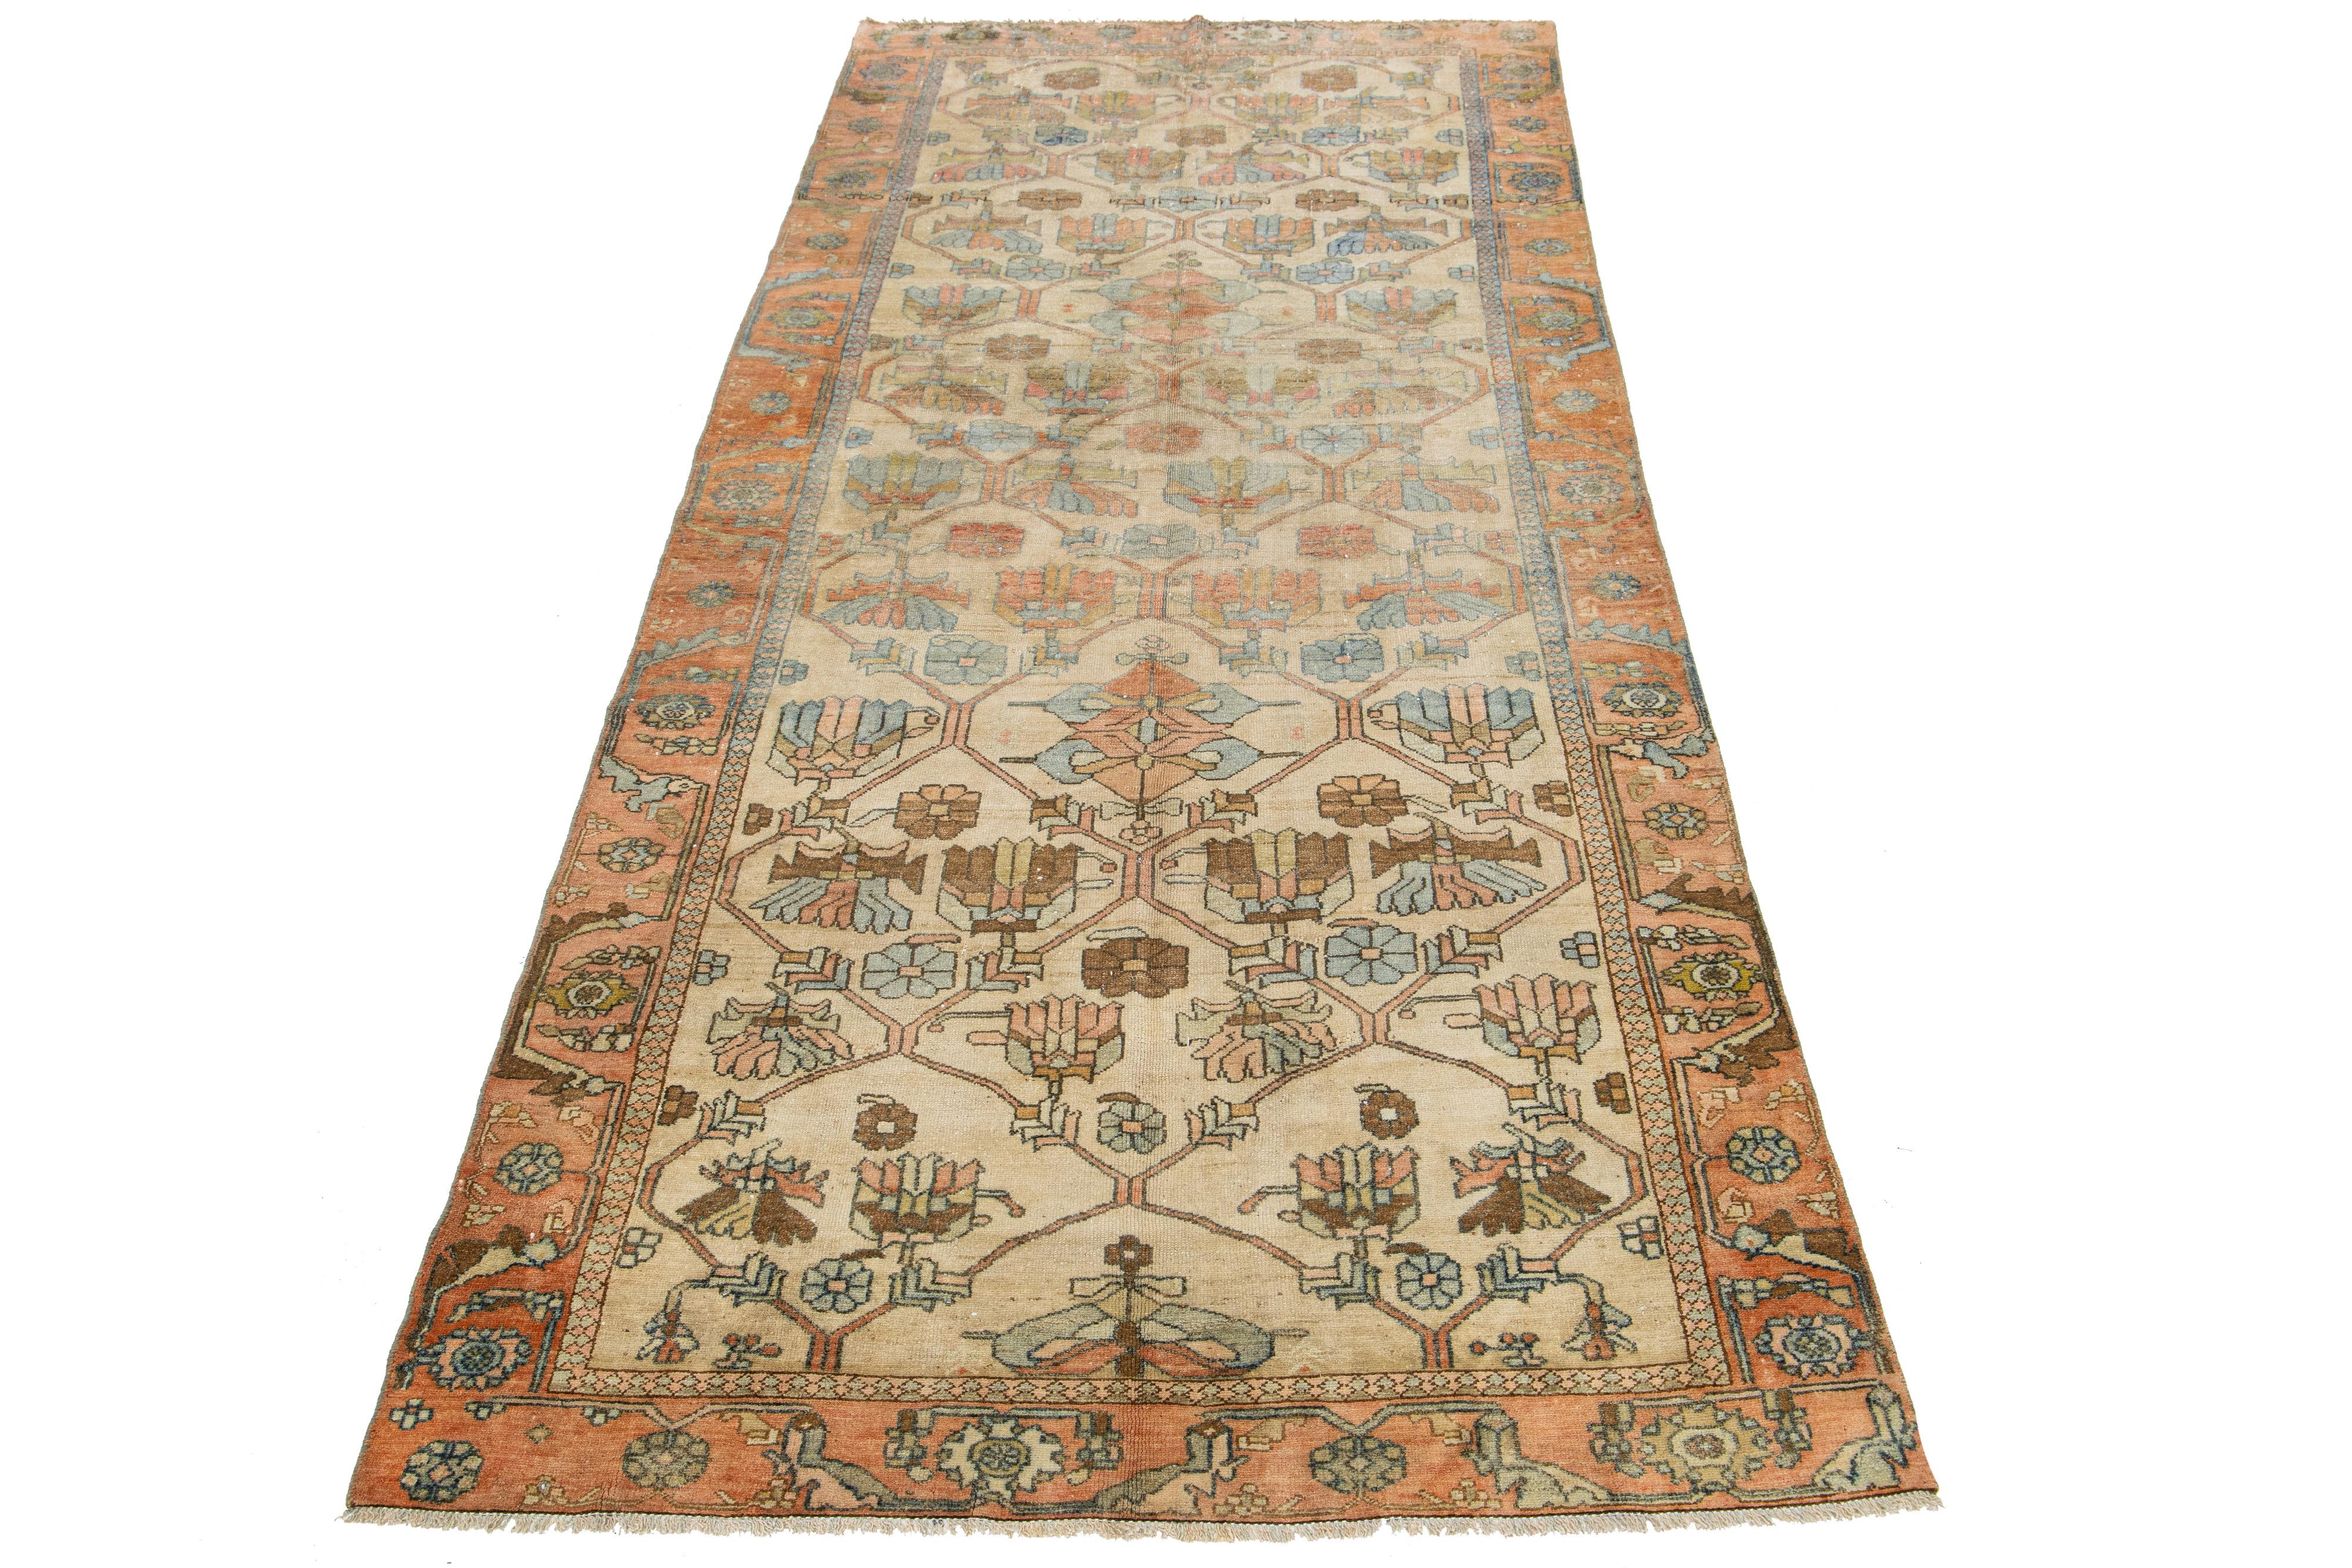 This antique Persian Malayer rug is hand-knotted wool. The design features a beautiful combination of beige and terracotta as the base, enhanced with blue highlights in a stunning, detailed floral pattern.

This rug measures 4'6